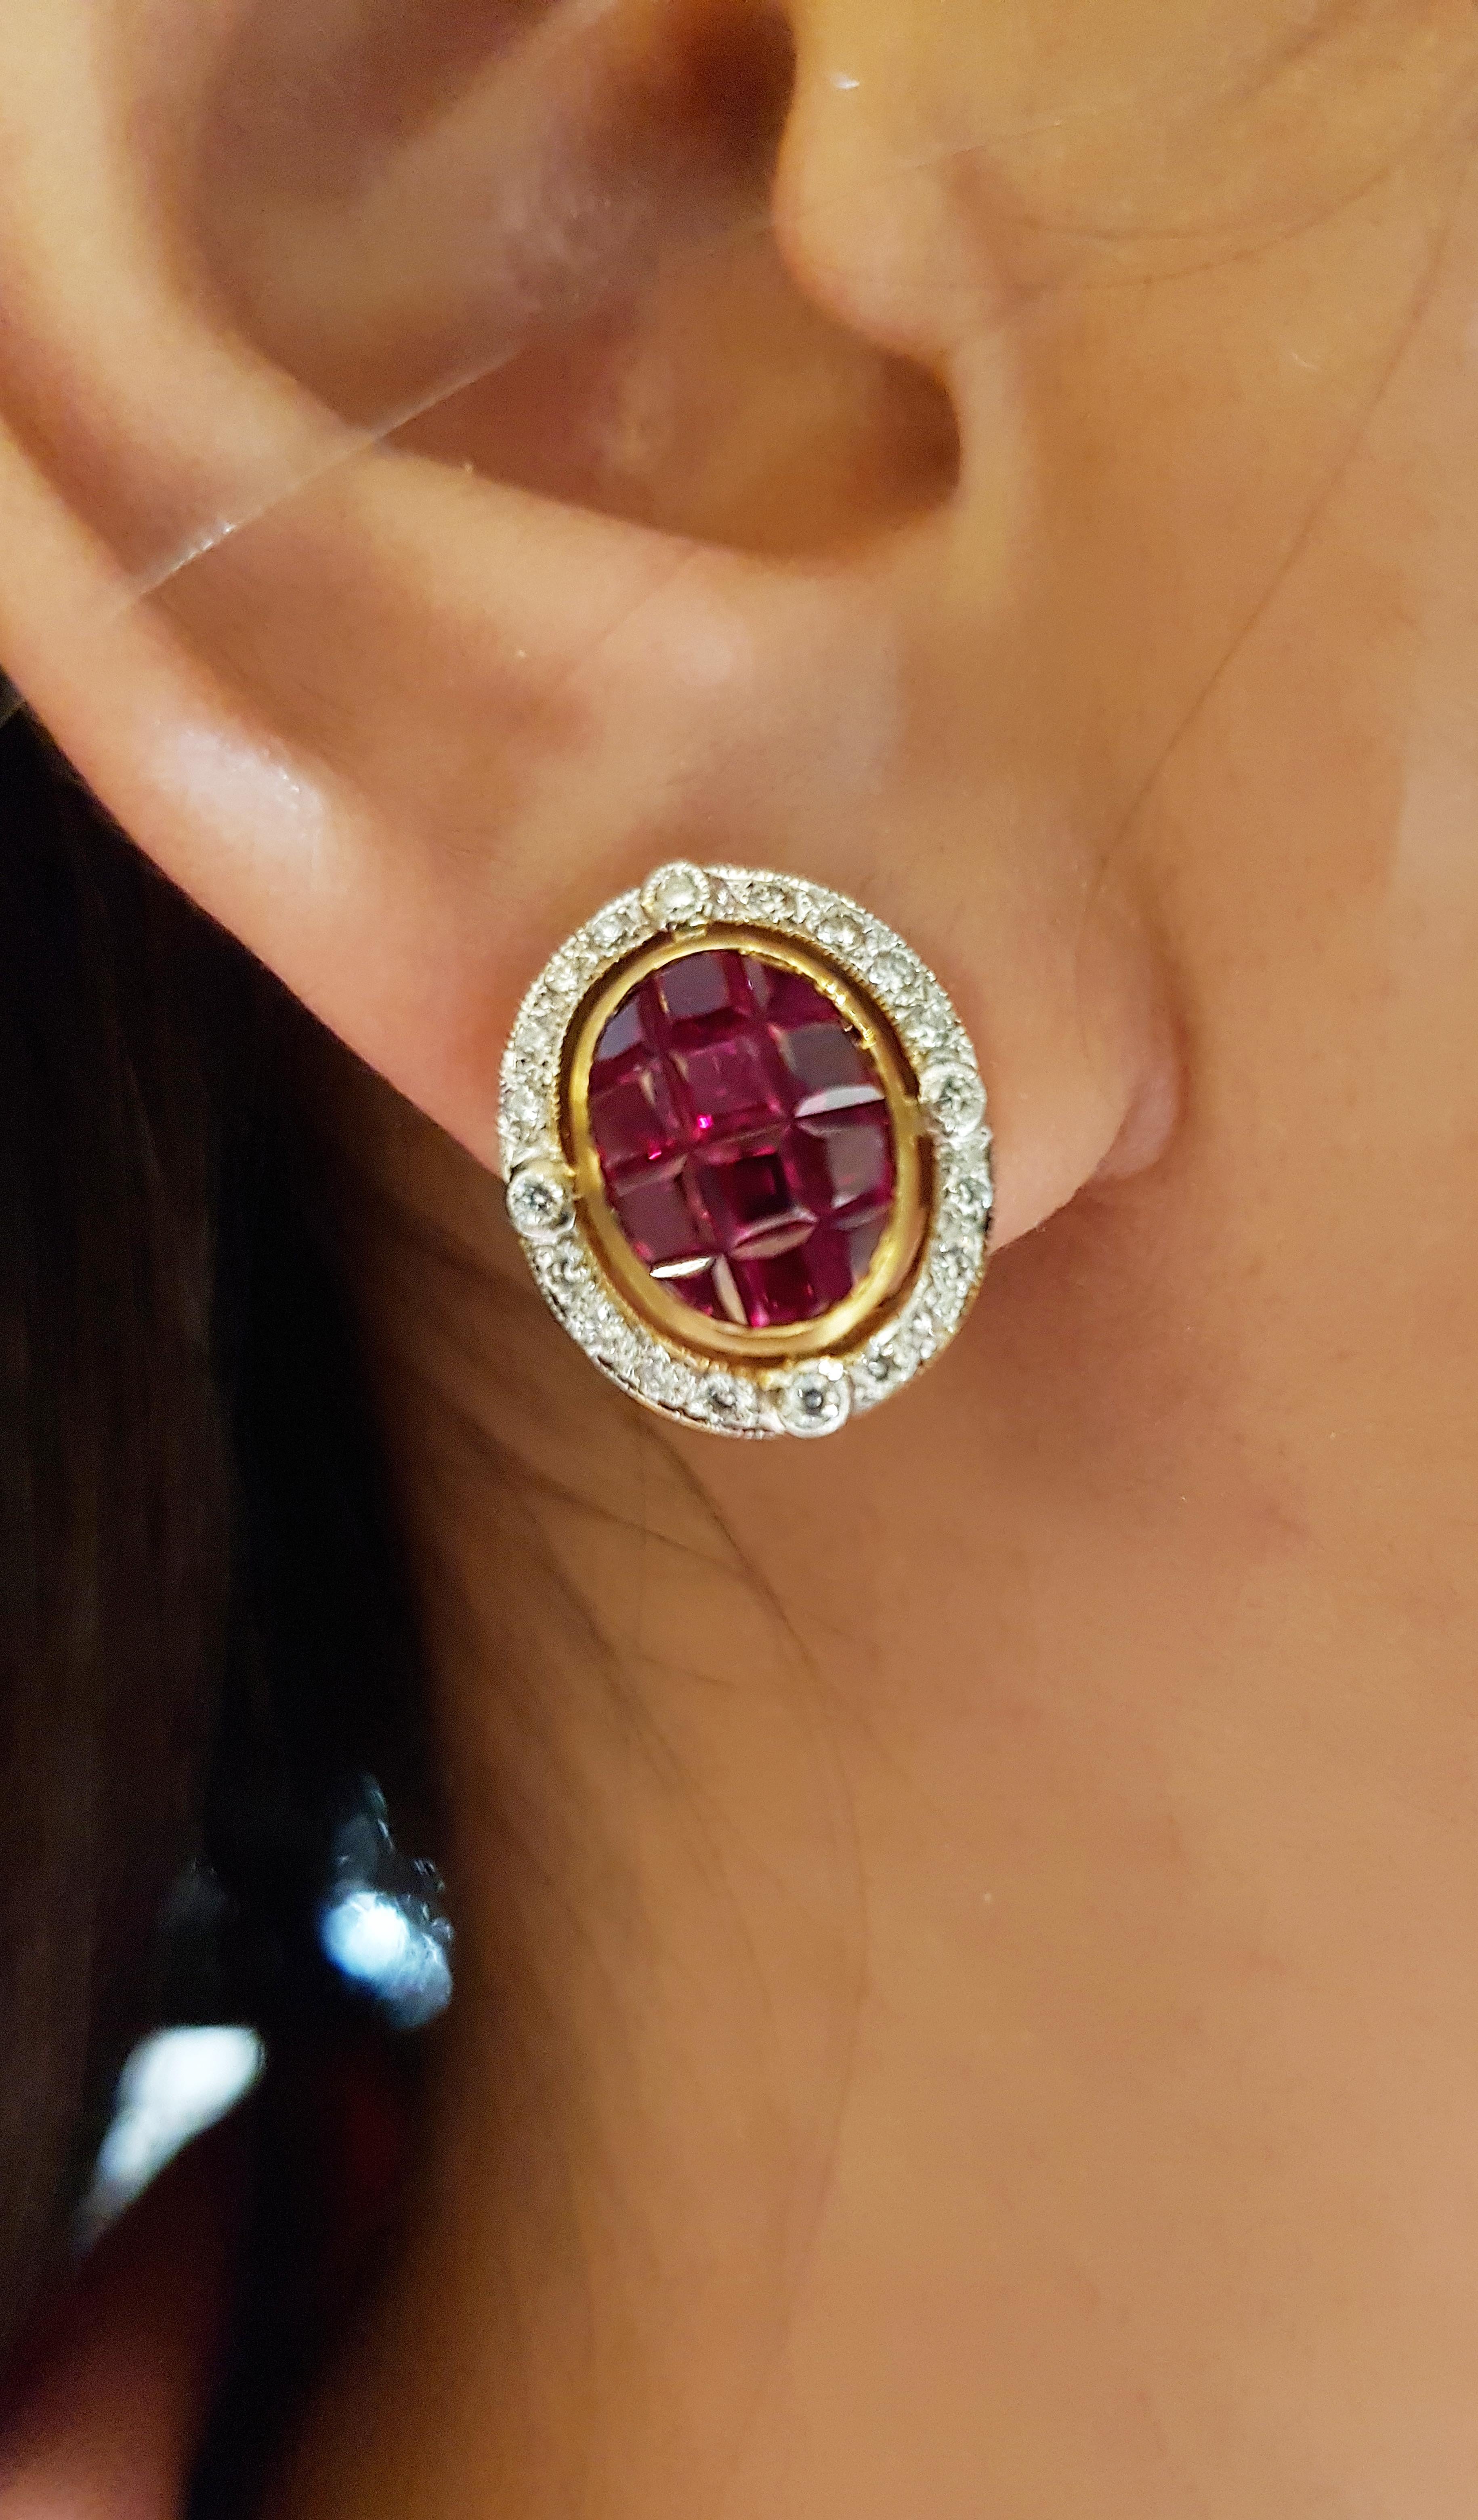 Ruby 7.60 carats with Diamond 0.34 carat Earrings set in 18 Karat Gold Settings

Width: 1.3 cm 
Length: 1.5 cm
Total Weight: 8.06 grams

